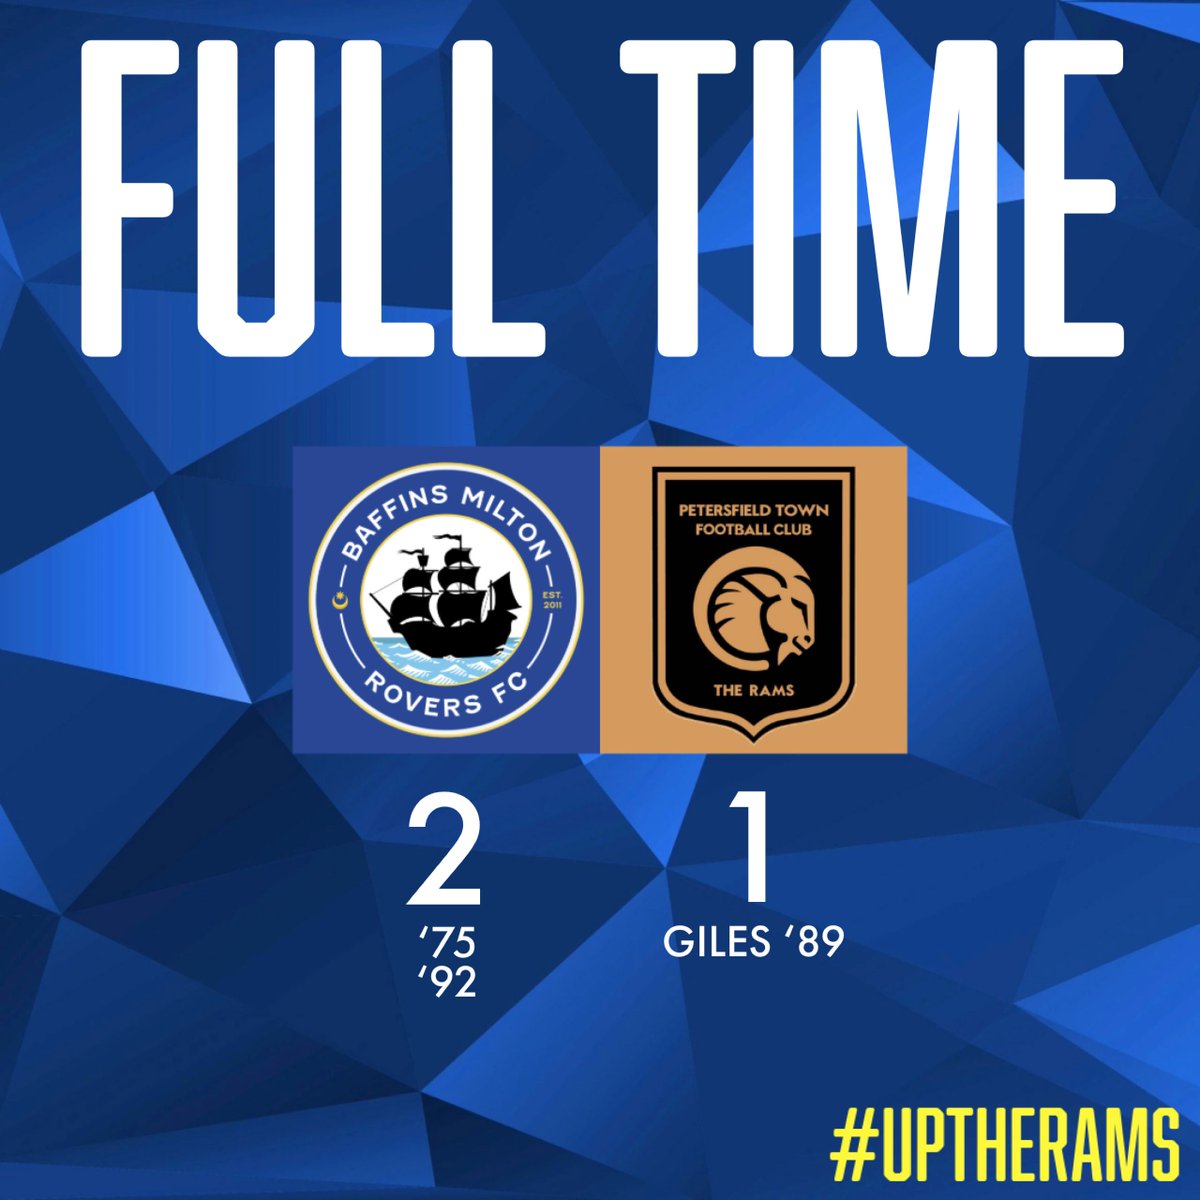 ⏱️| 𝗙𝗨𝗟𝗟 𝗧𝗜𝗠𝗘 Baffins MR 2-1 The Rams The hosts take all 3 points right at the end of the game. #uptherams